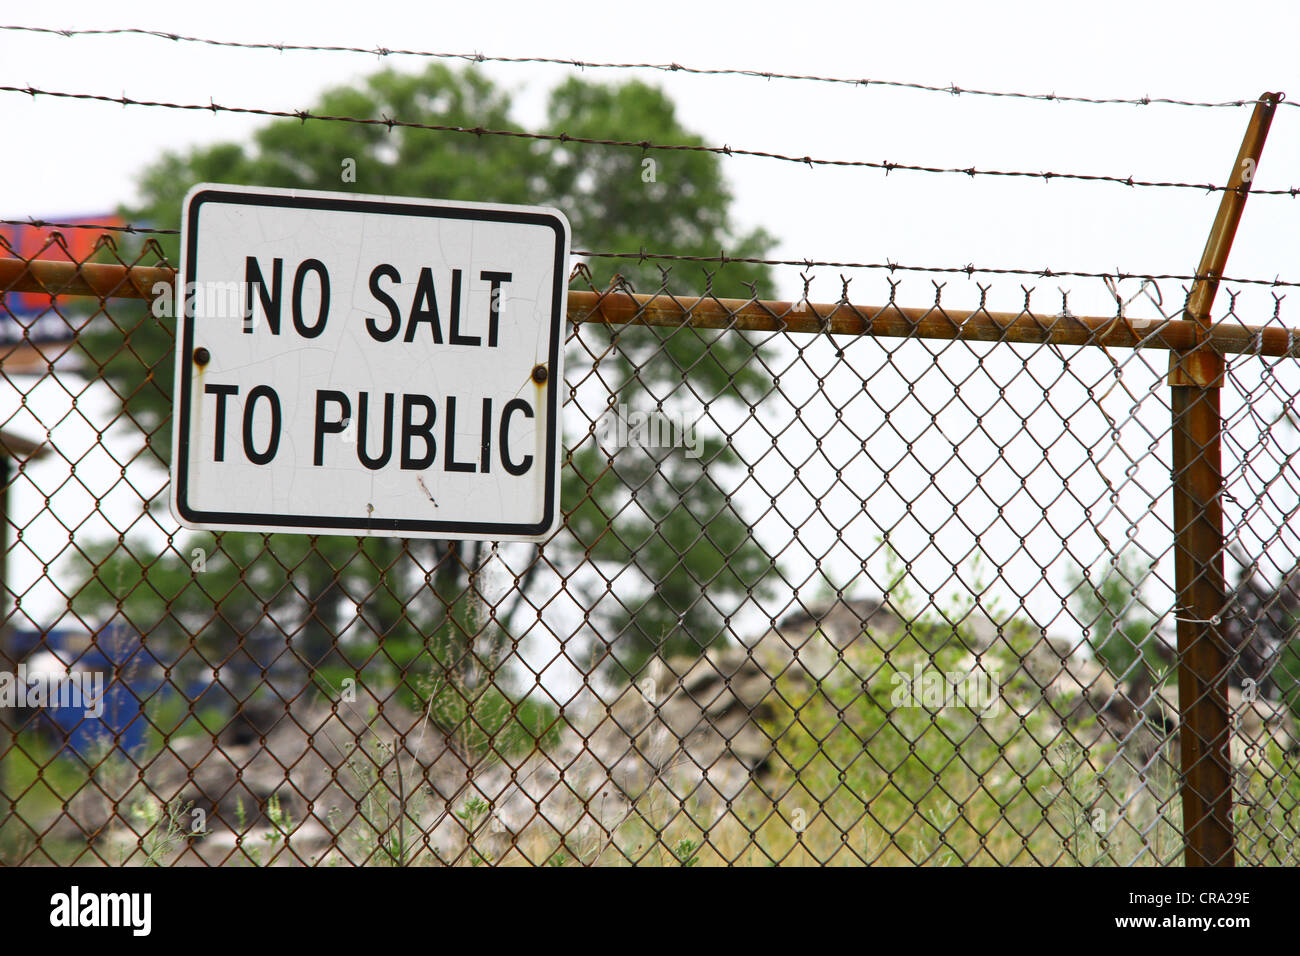 A sign posted on the fence at the Caniff Salt Yard in Detroit, MI indicated that no salt is available to the public. Stock Photo